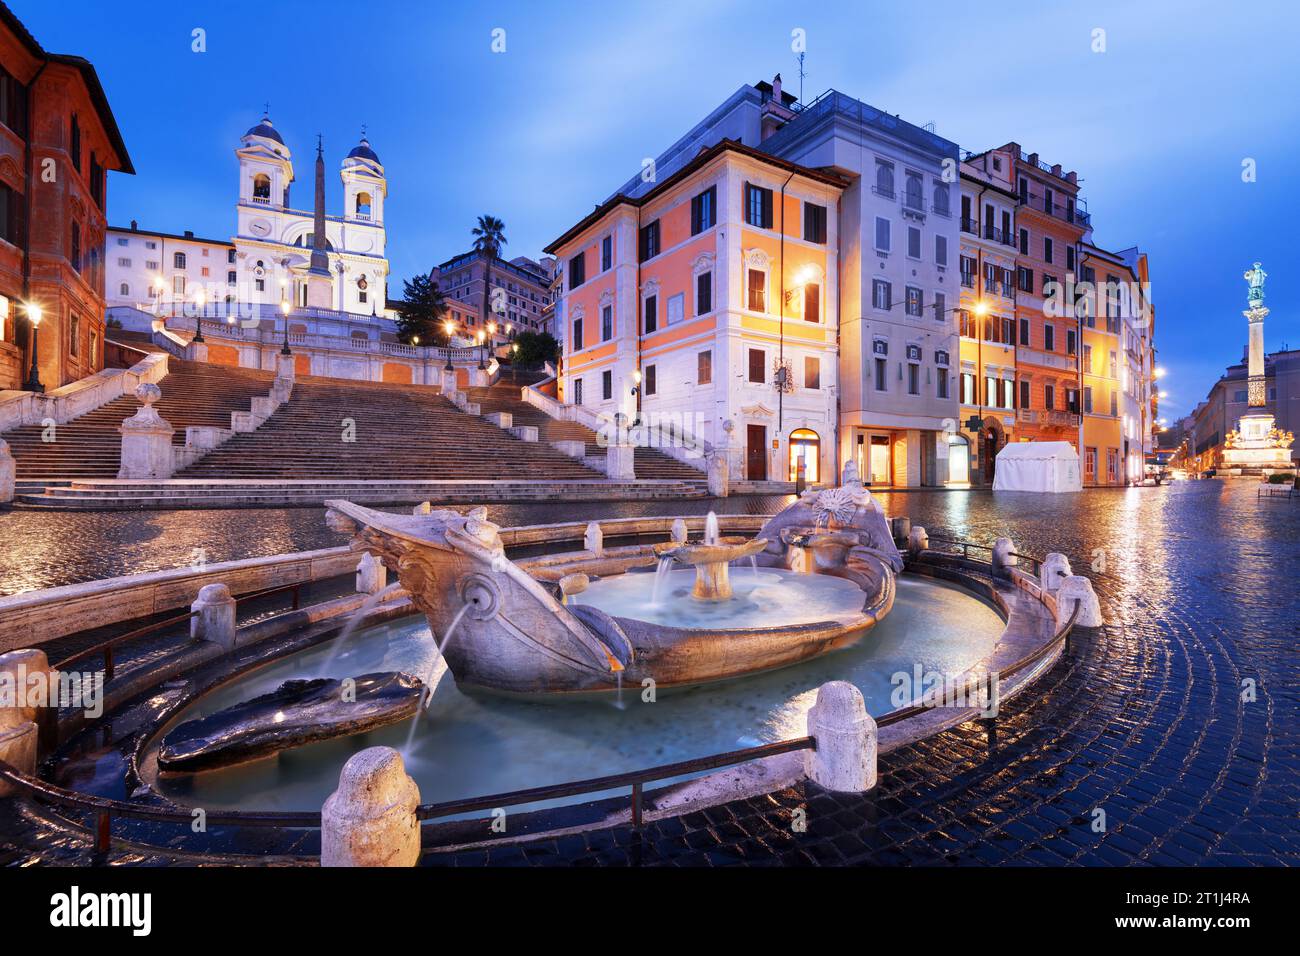 The Spanish Steps in Rome, Italy at blue hour. Stock Photo